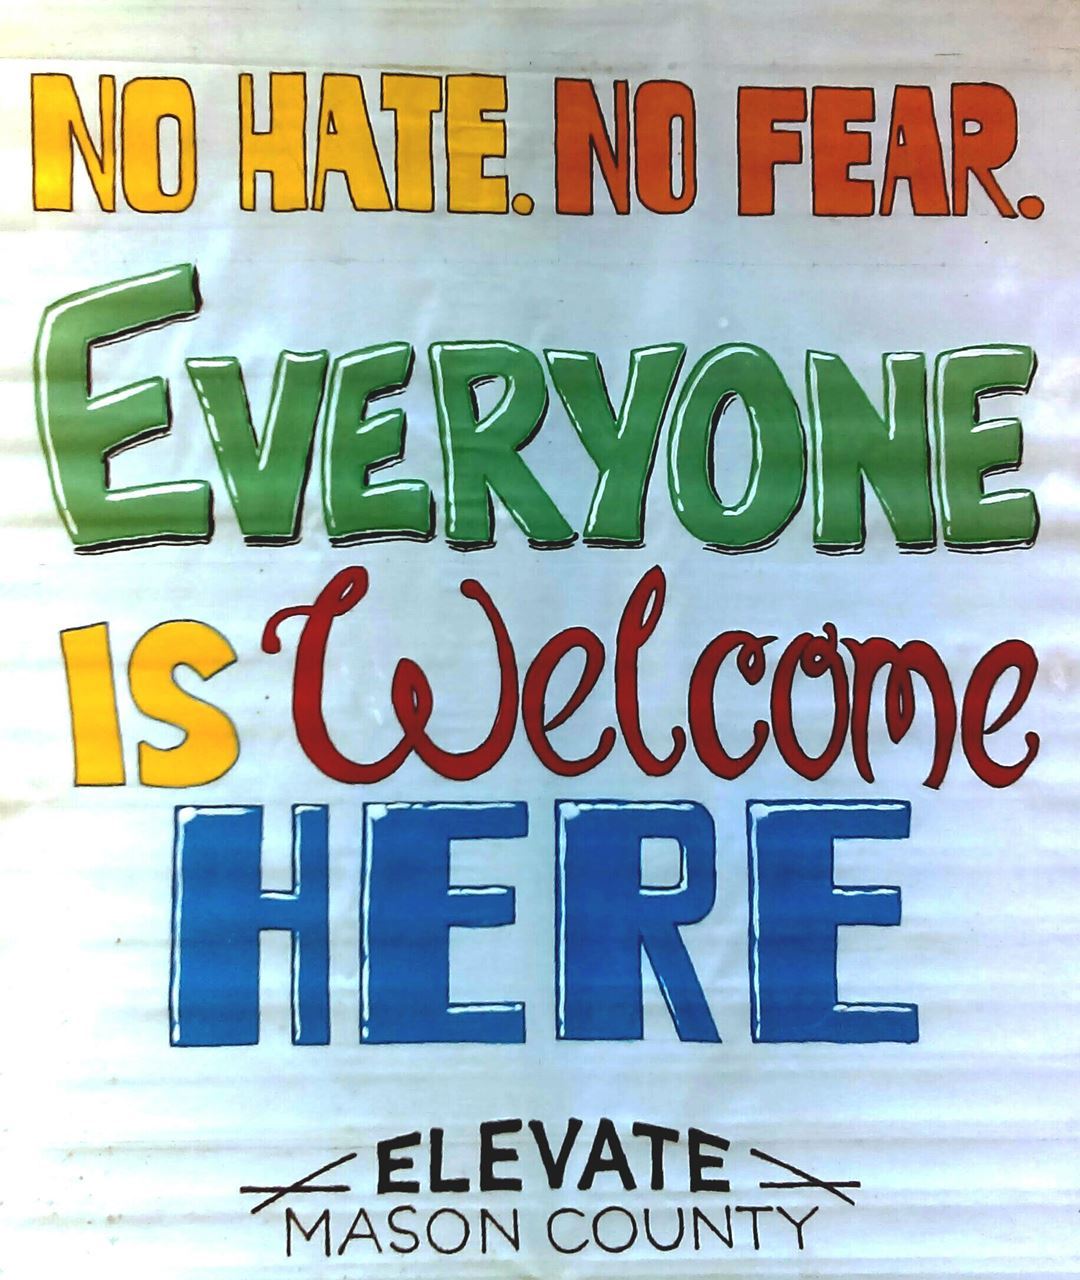 No Hate, No Fear sign for Immigrant Rights